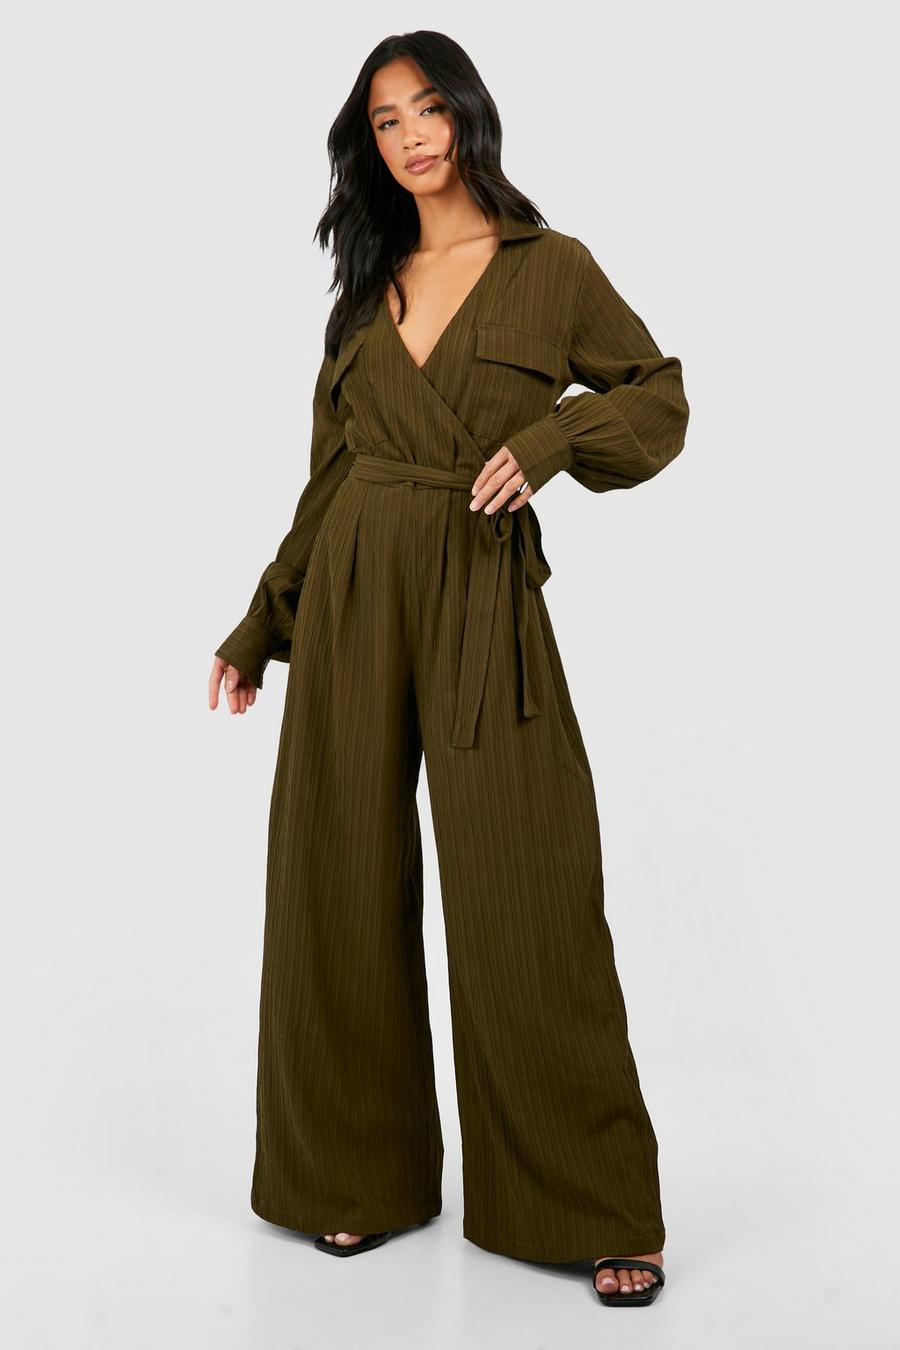 Cato Fashions  Cato Petite Floral Mesh Sleeve Jumpsuit